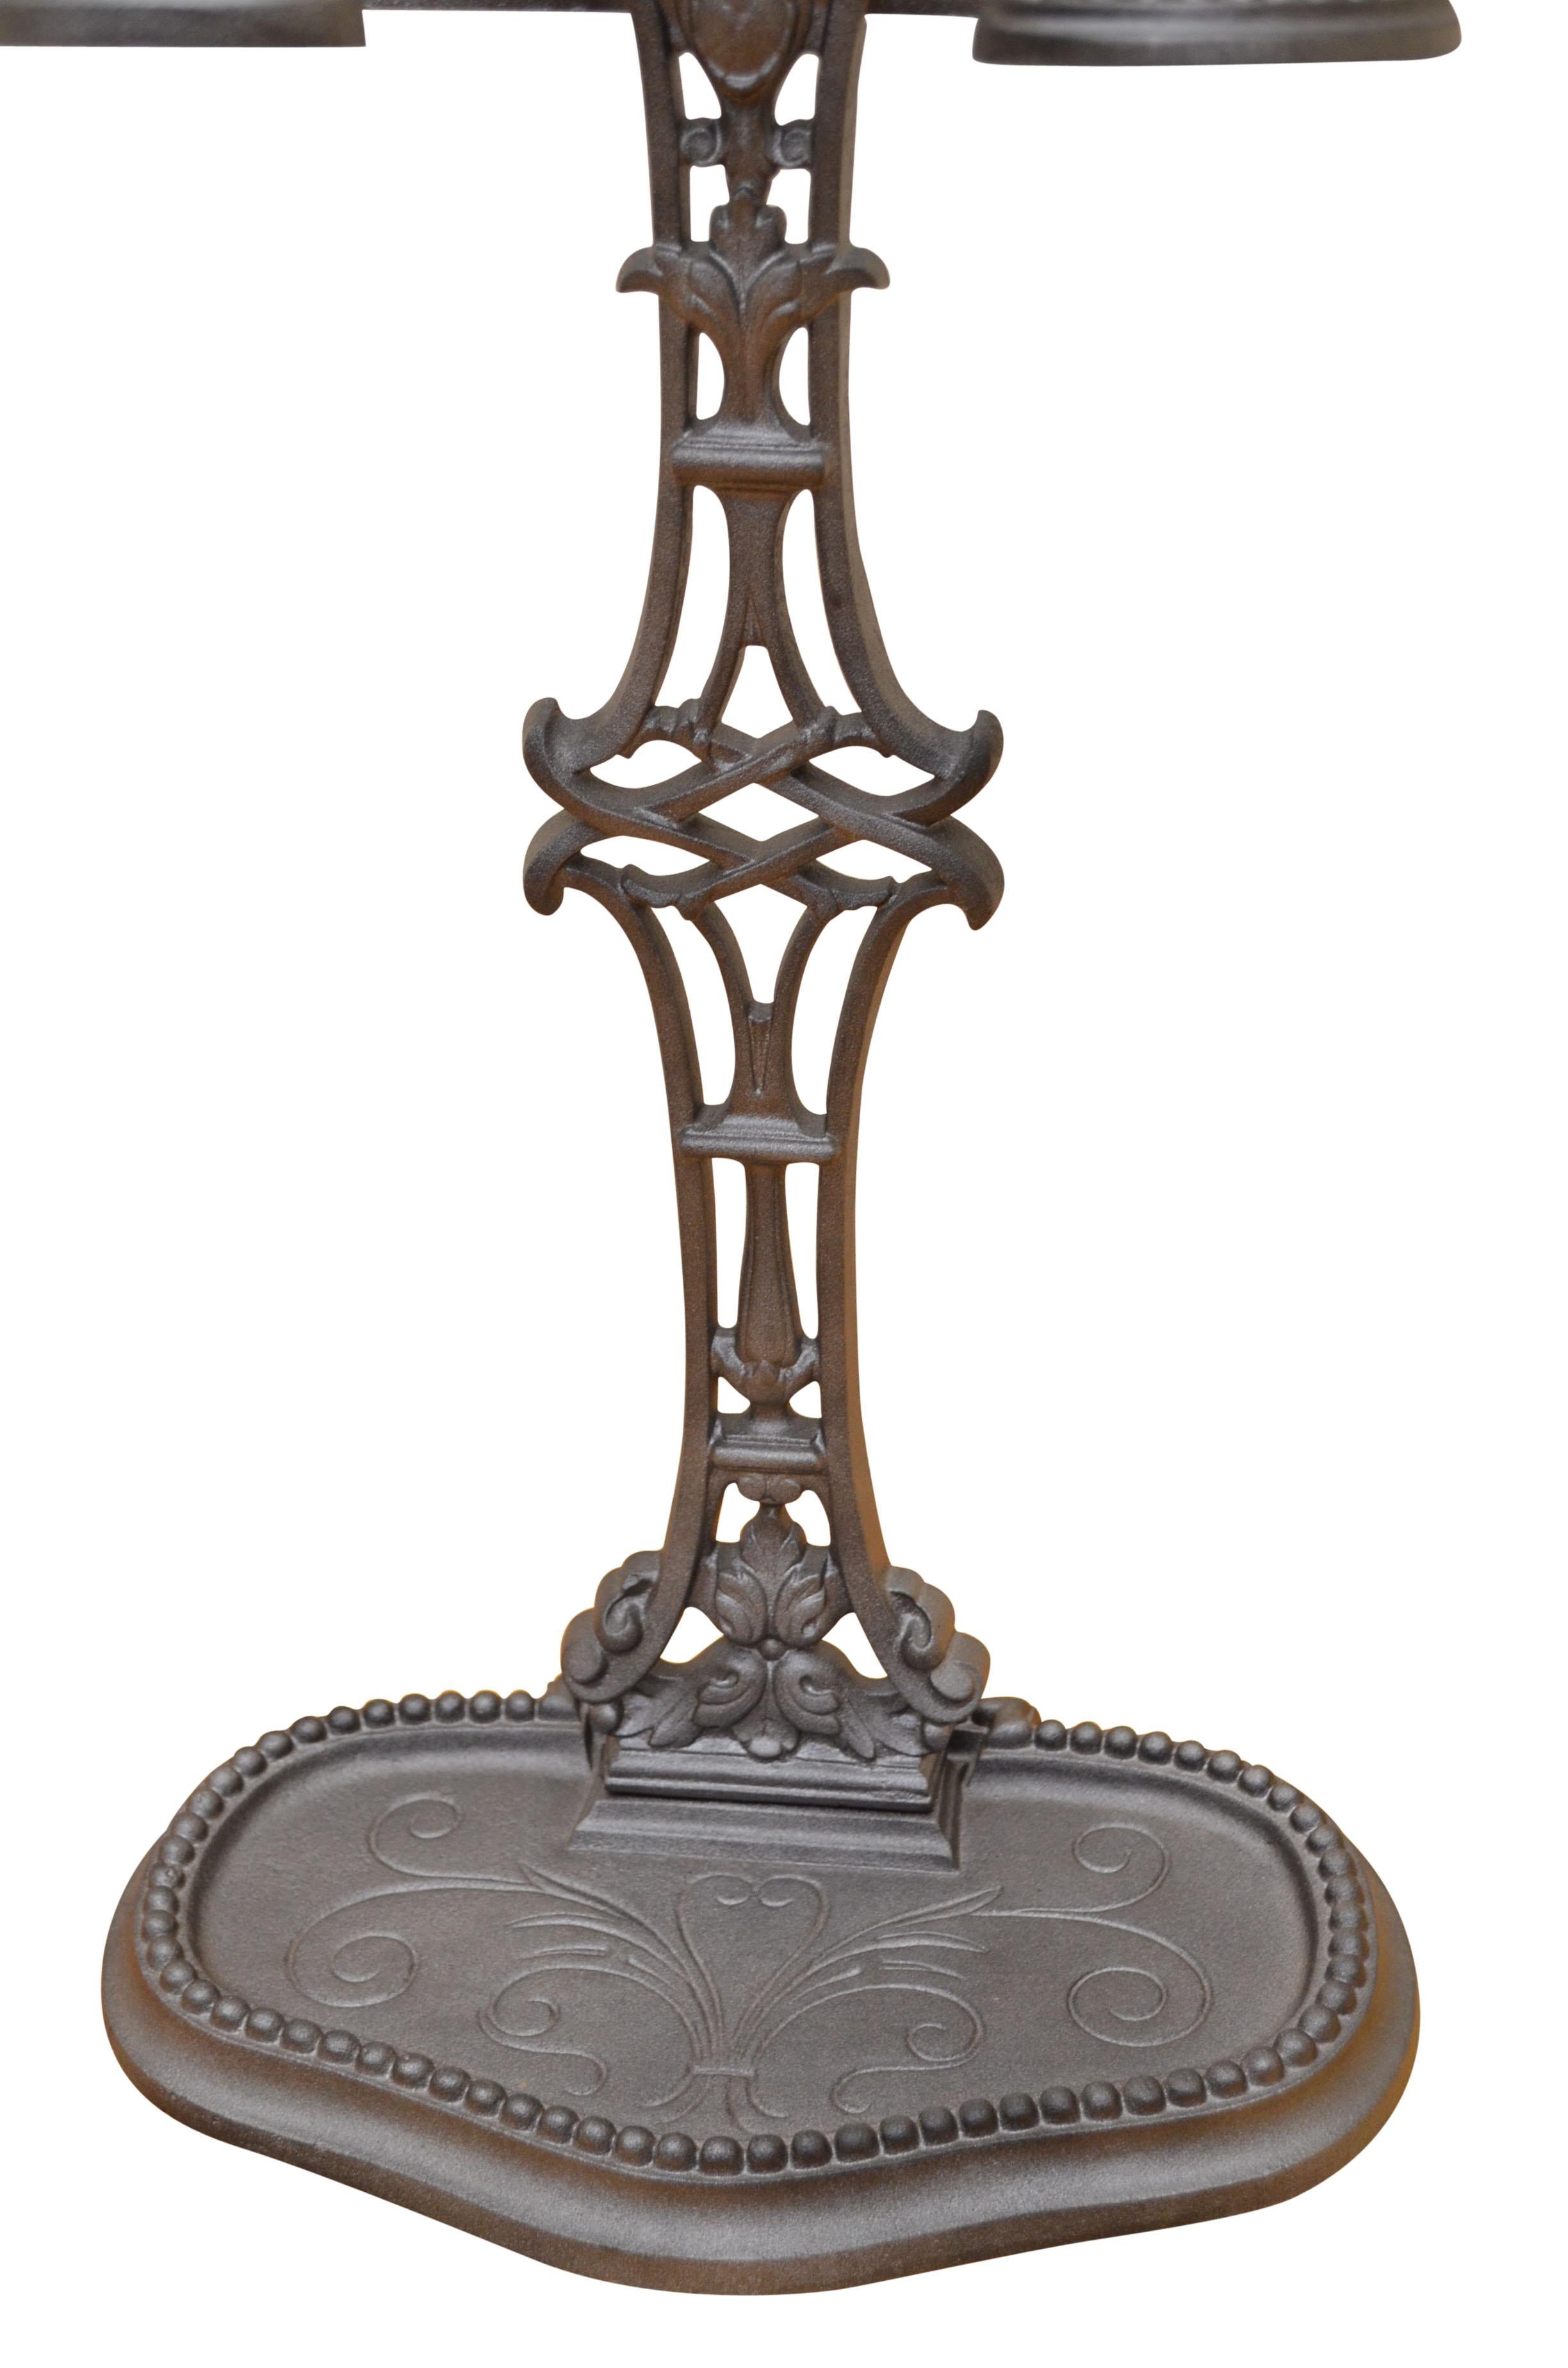 19th Century French Umbrella Stand or Fire Companion Stand In Good Condition For Sale In Whaley Bridge, GB